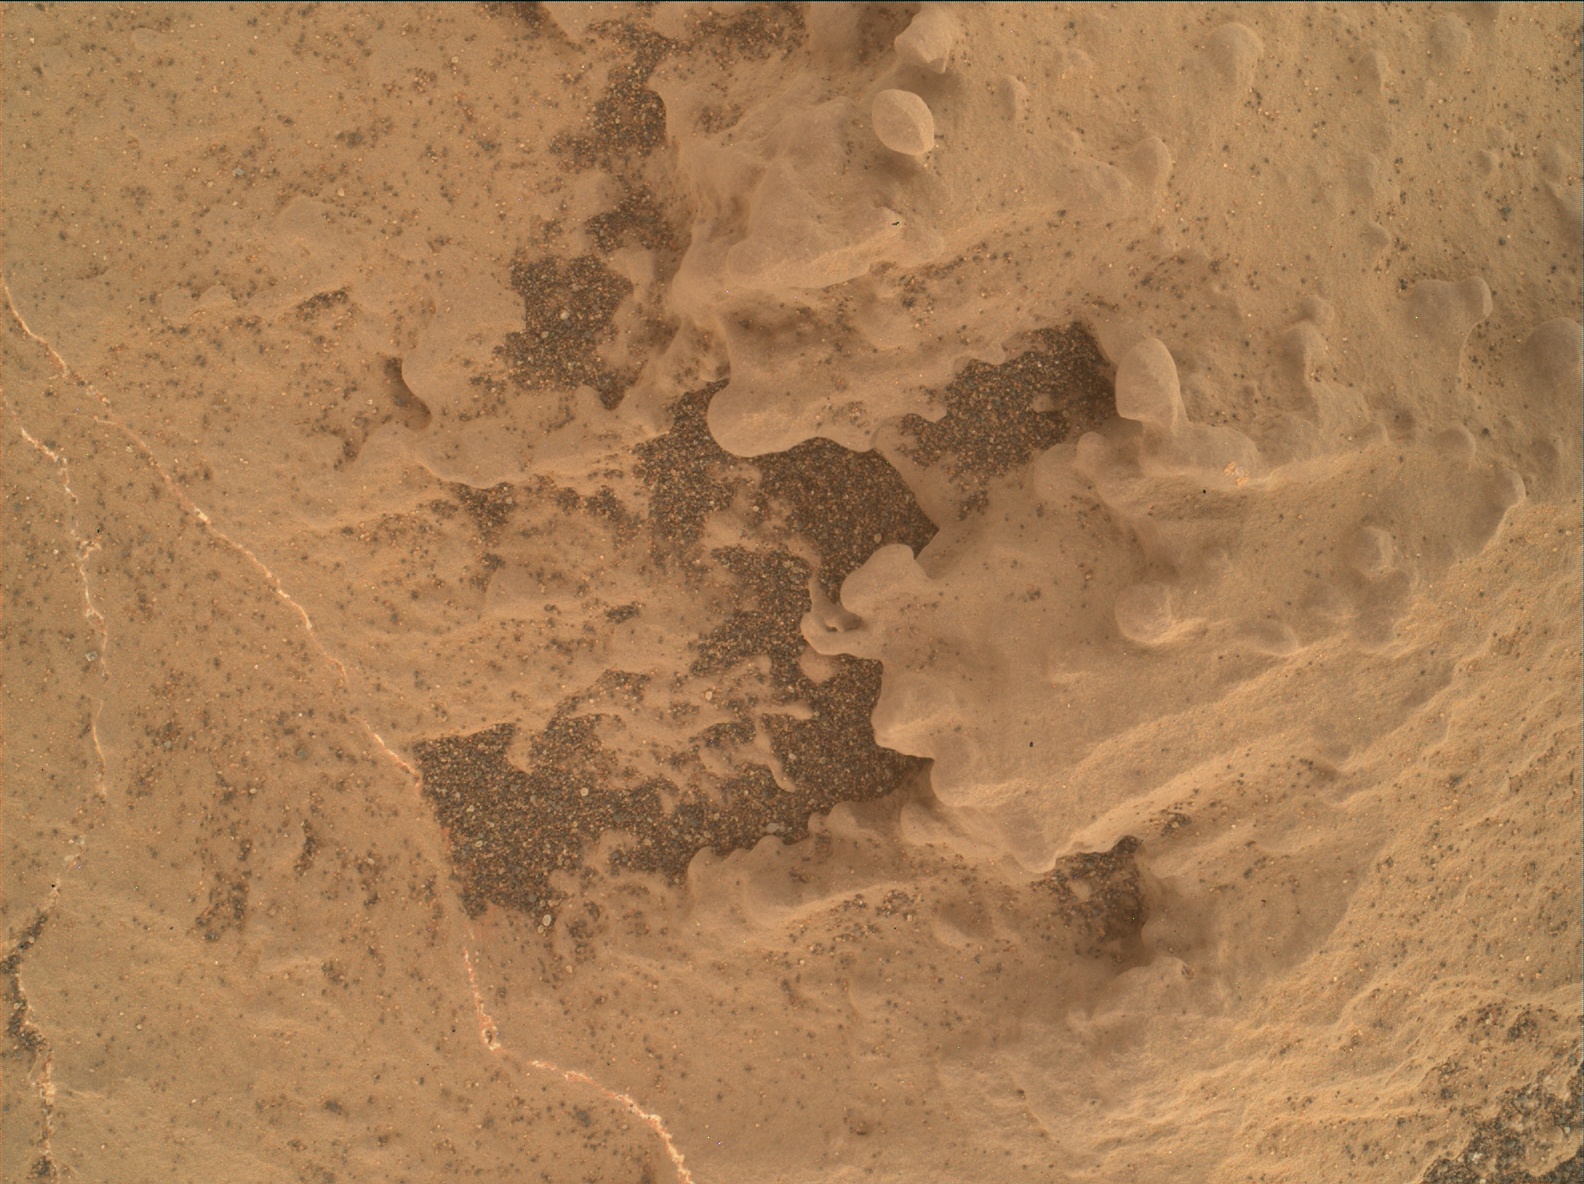 Nasa's Mars rover Curiosity acquired this image using its Mars Hand Lens Imager (MAHLI) on Sol 2014